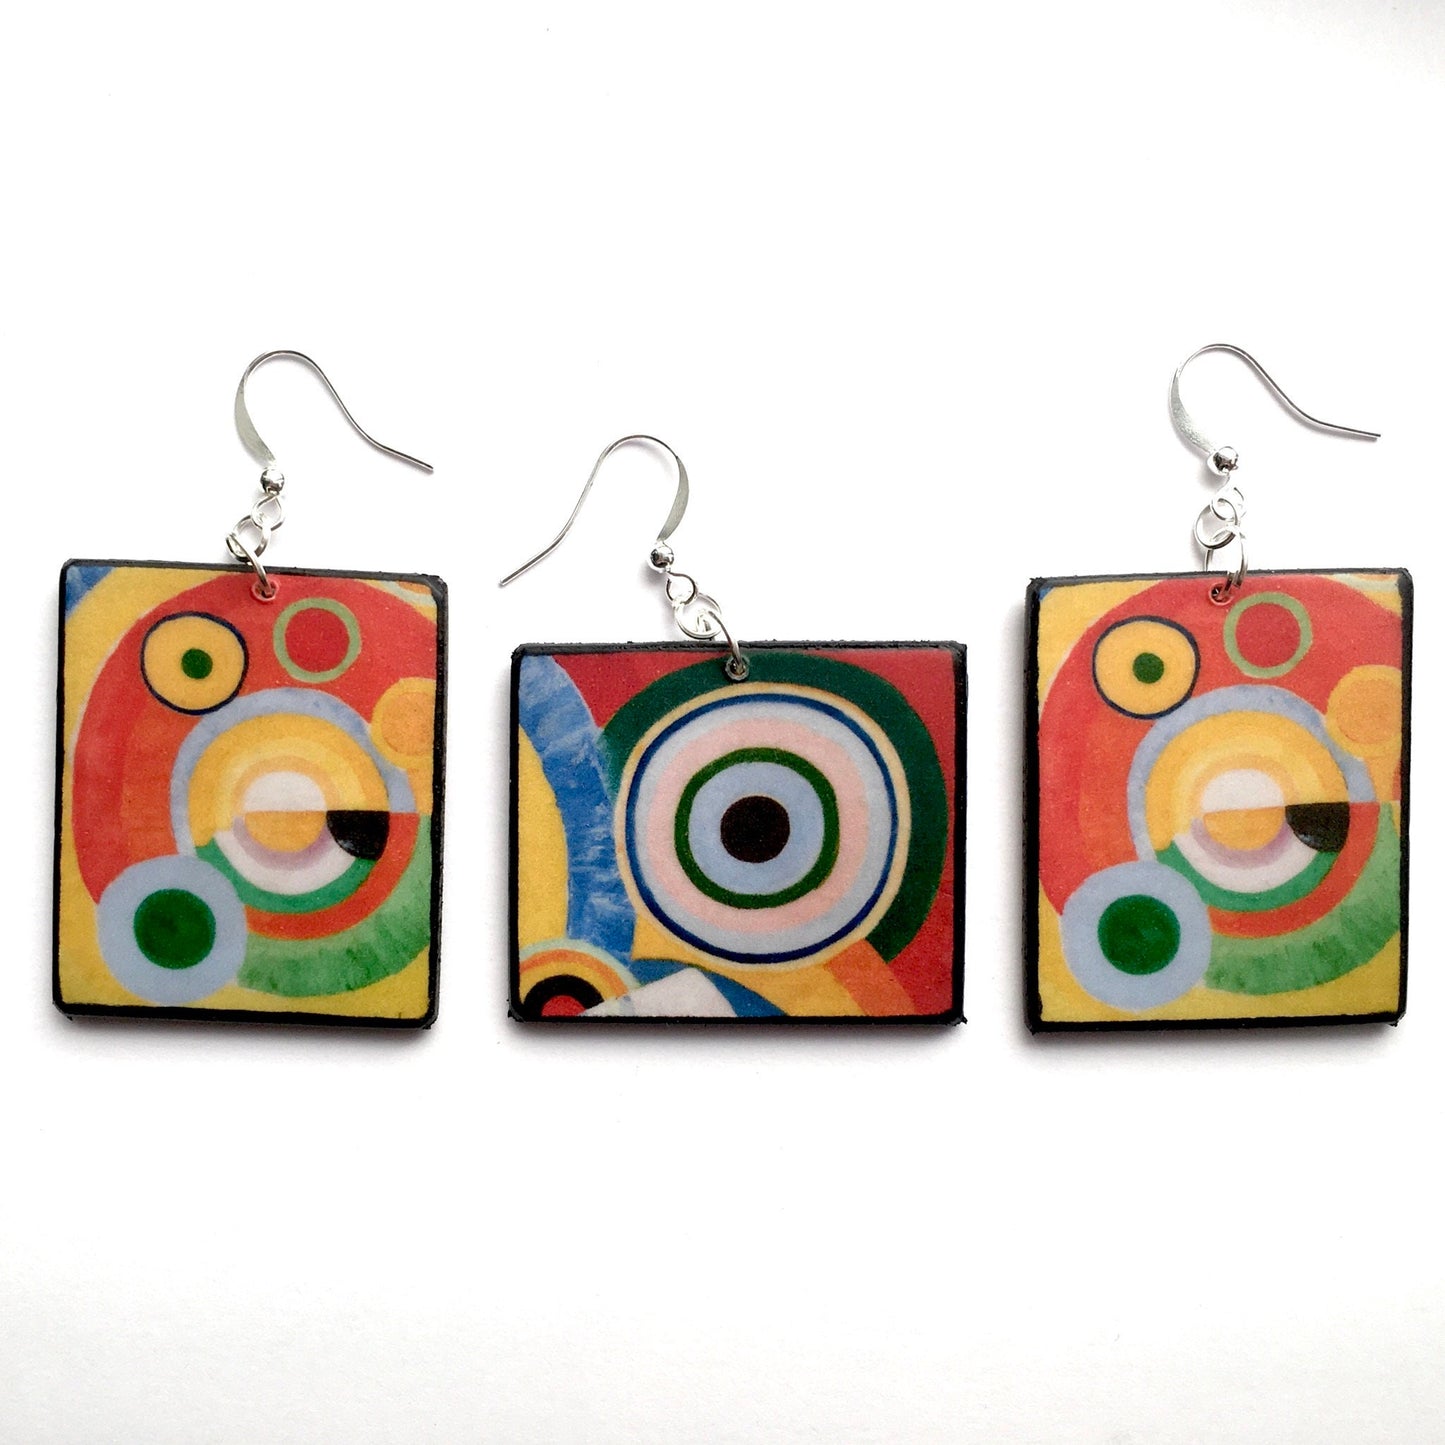  Three asymmetrical, geometric, colourful art earrings inspired by Robert Delaunay famous painting "Rythme, Joie de vivre". Sustainable wood and plated silver hooks. Dimensions: cm 4 x 3.5 x 3mm approx.  